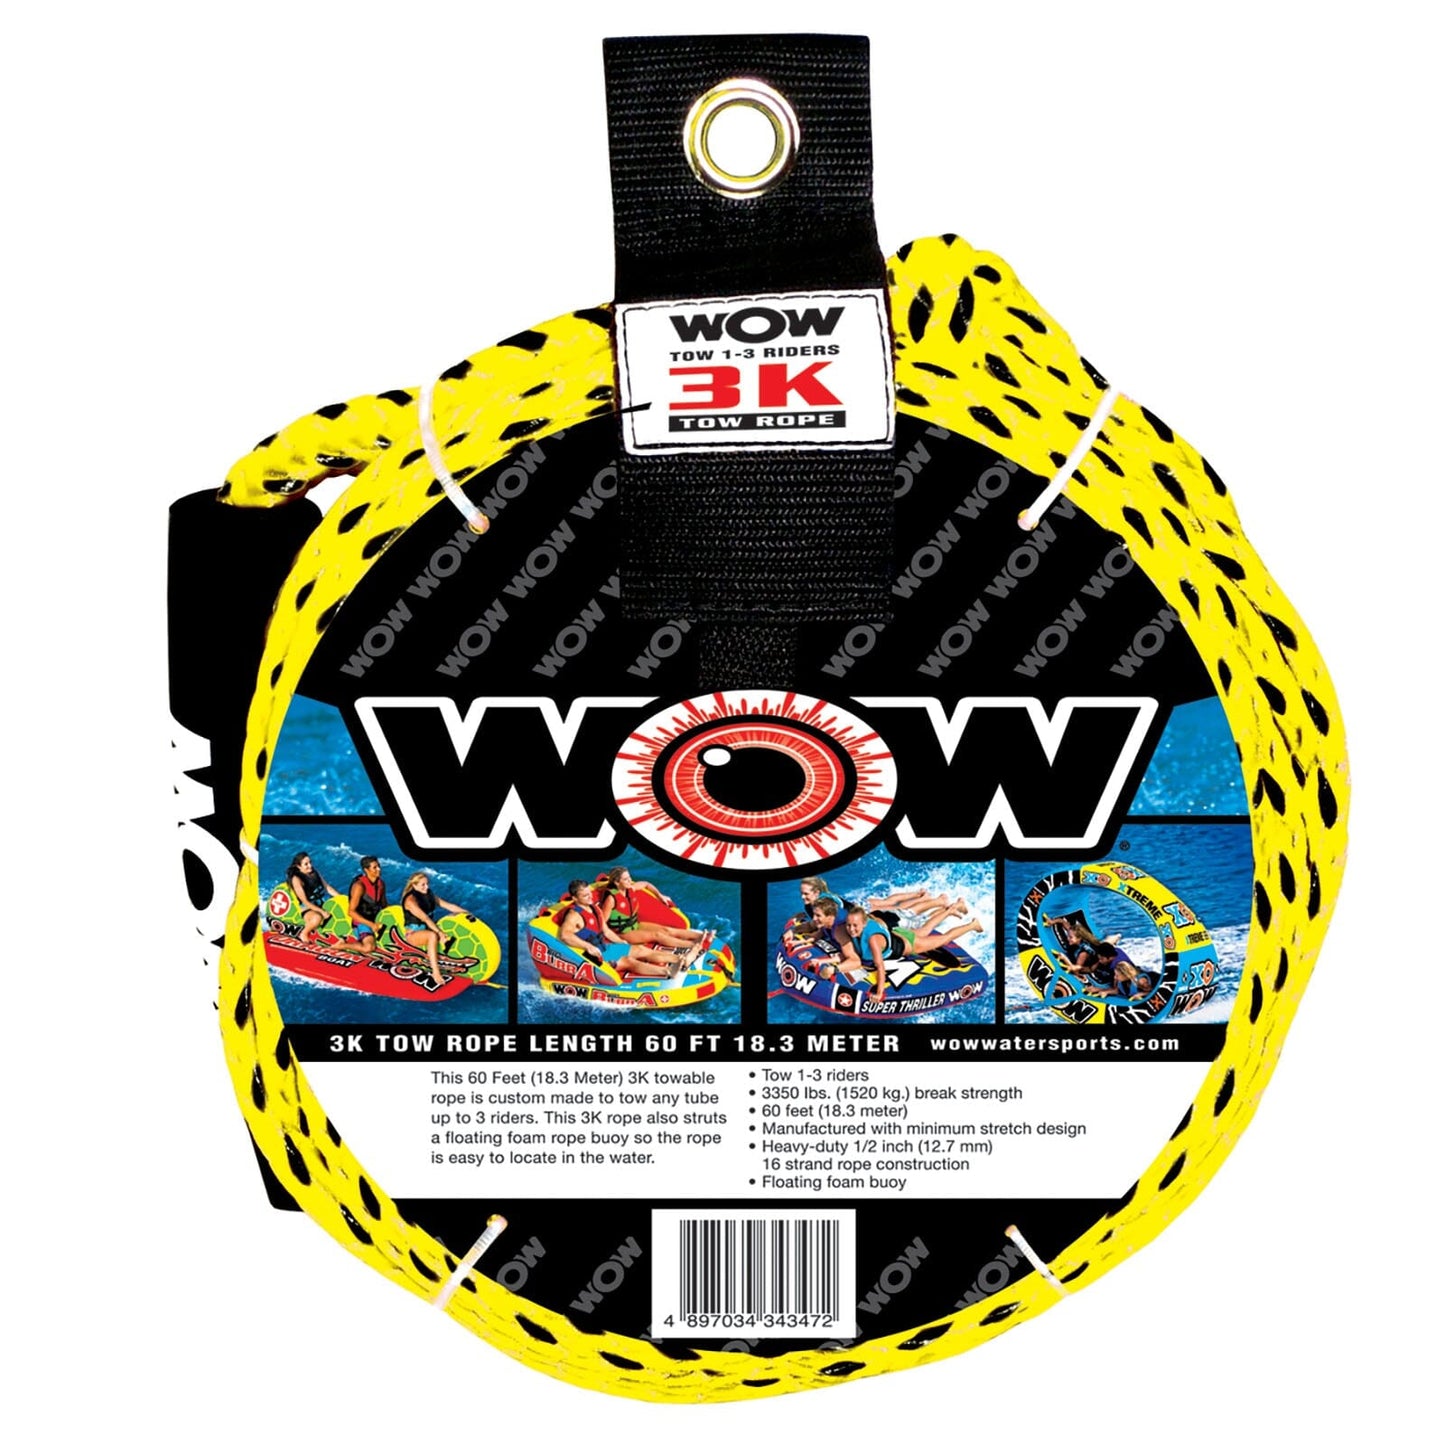 3K 60' Tow Rope